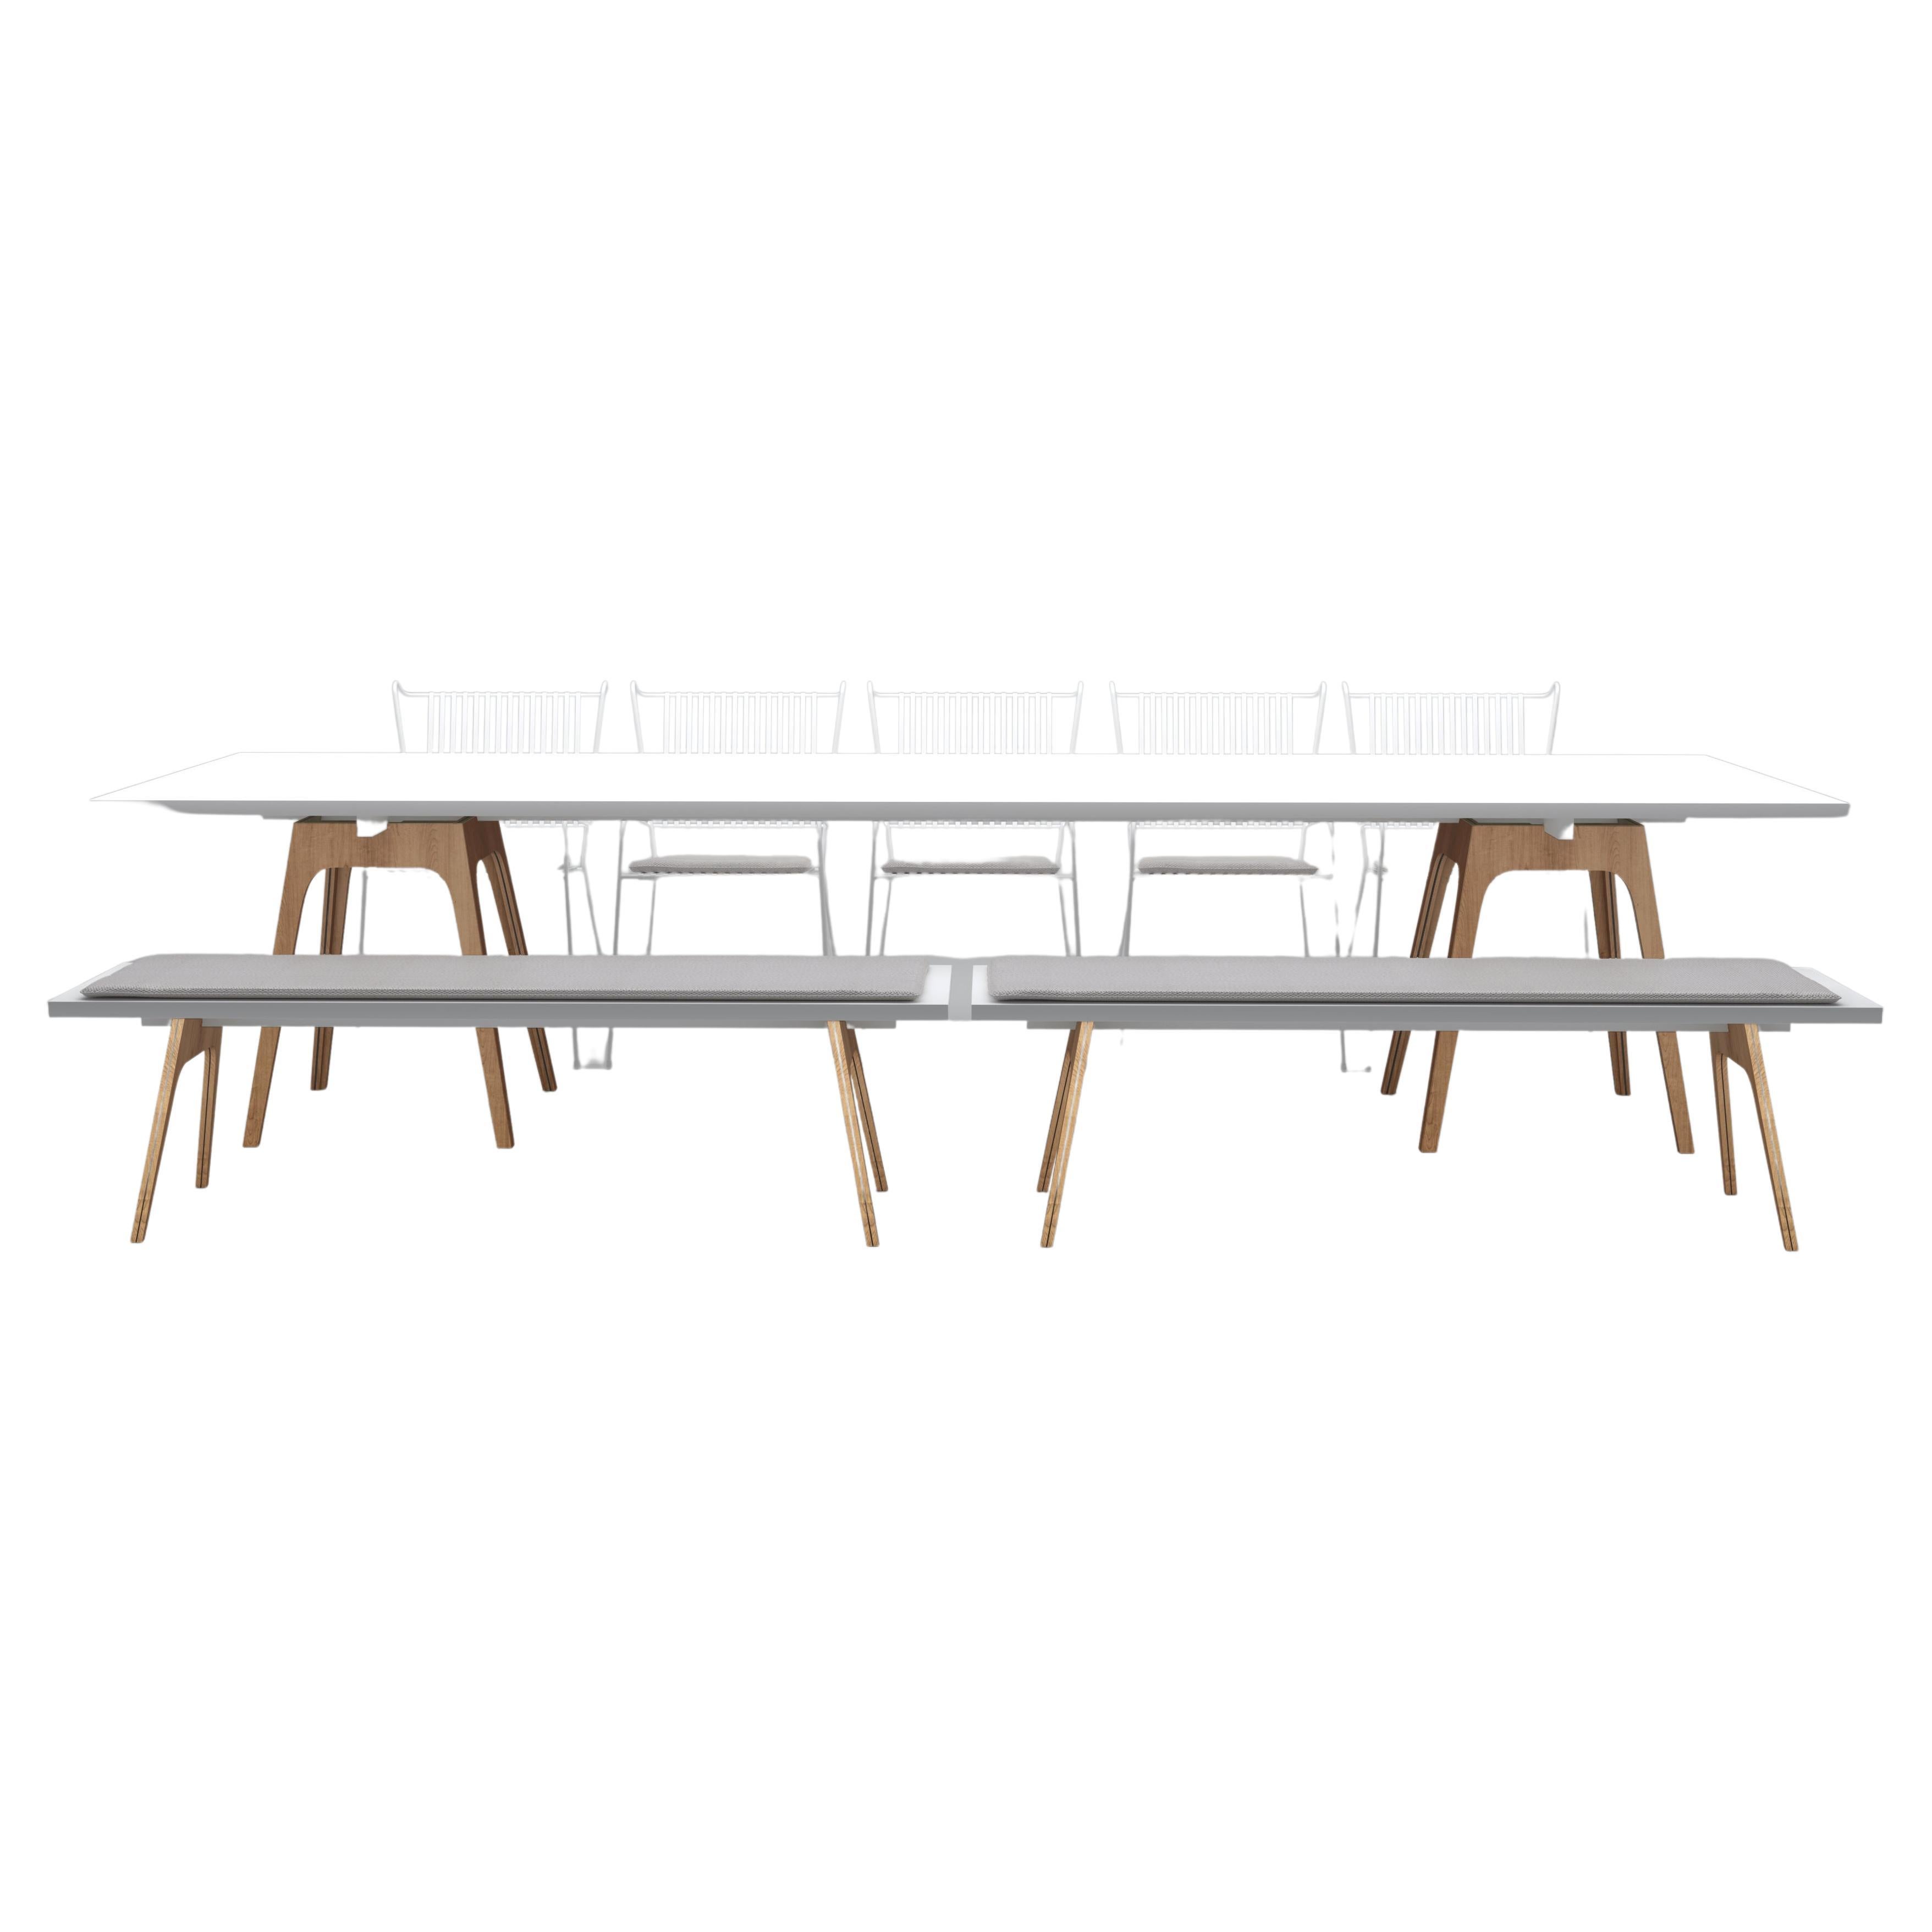 Set of 8 Marina White Dining Table, Benches and Capri Chairs by Cools Collection For Sale